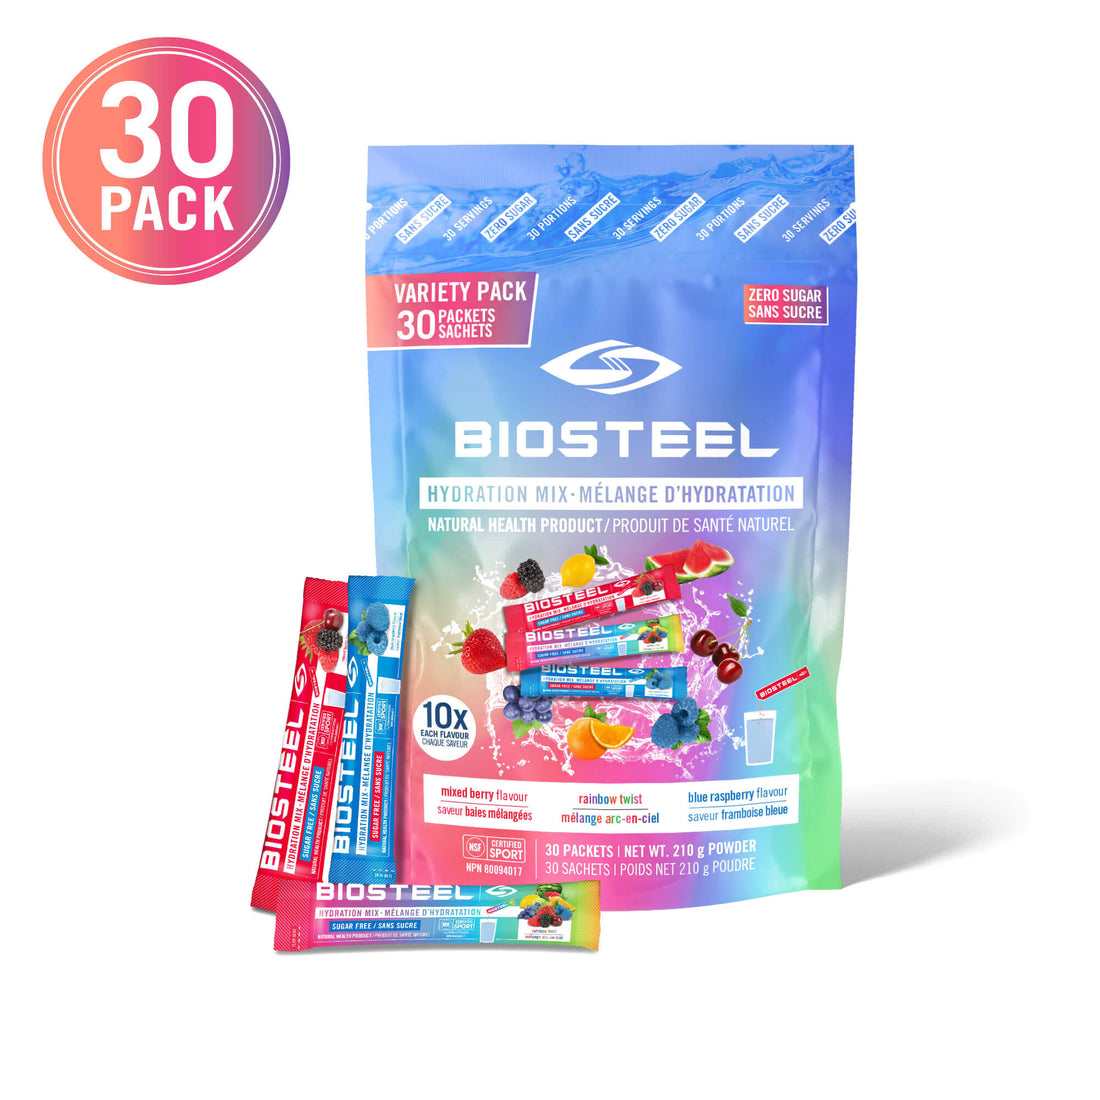 HYDRATION MIX / Variety Pack - 30 Packets